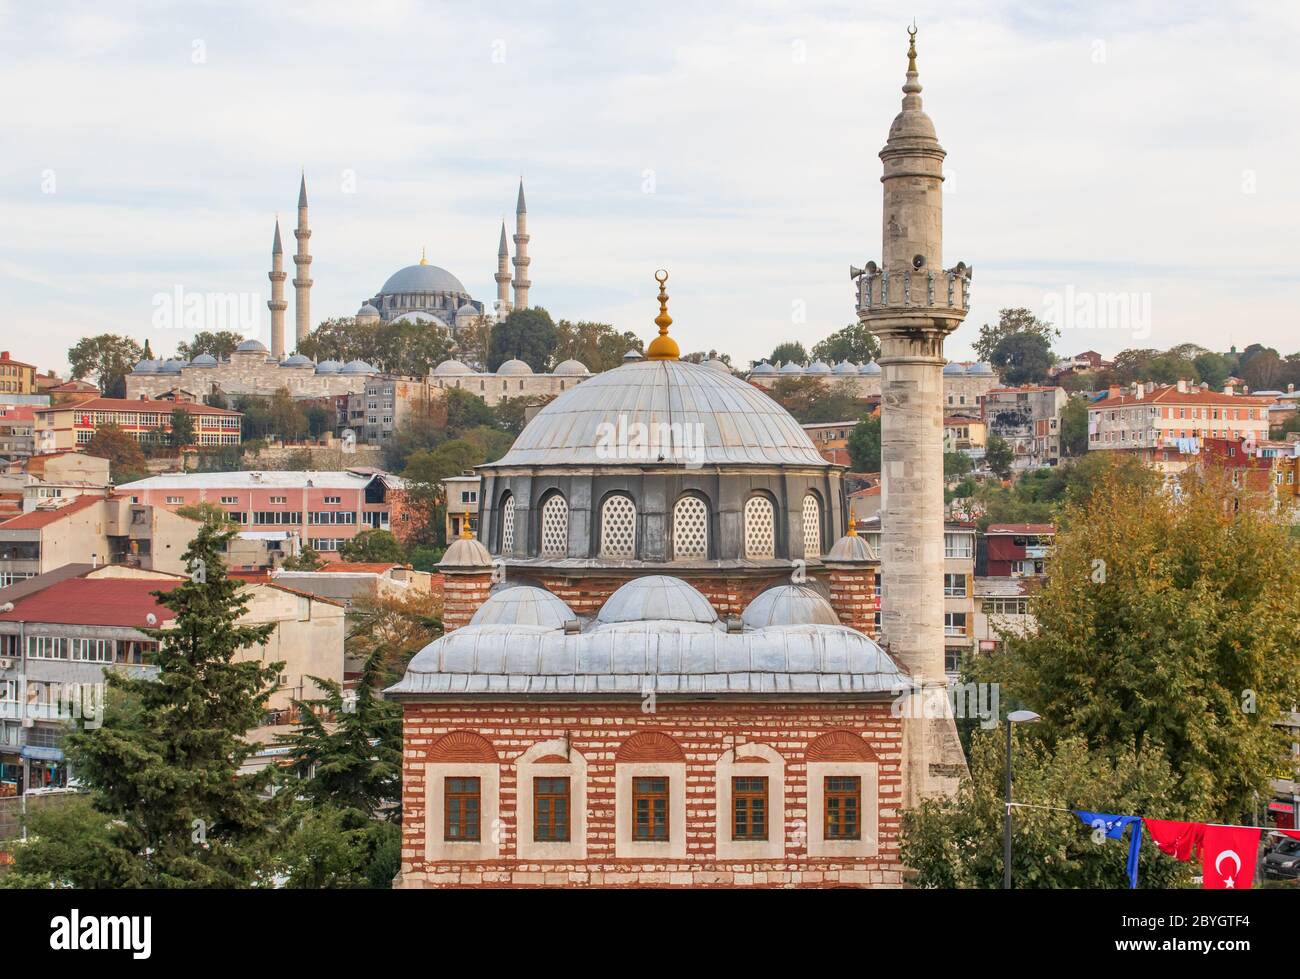 A country with a strong muslim majority, Turkey has mosques at every corner. Here in particular one of the many wonderful mosques in Istanbul Stock Photo